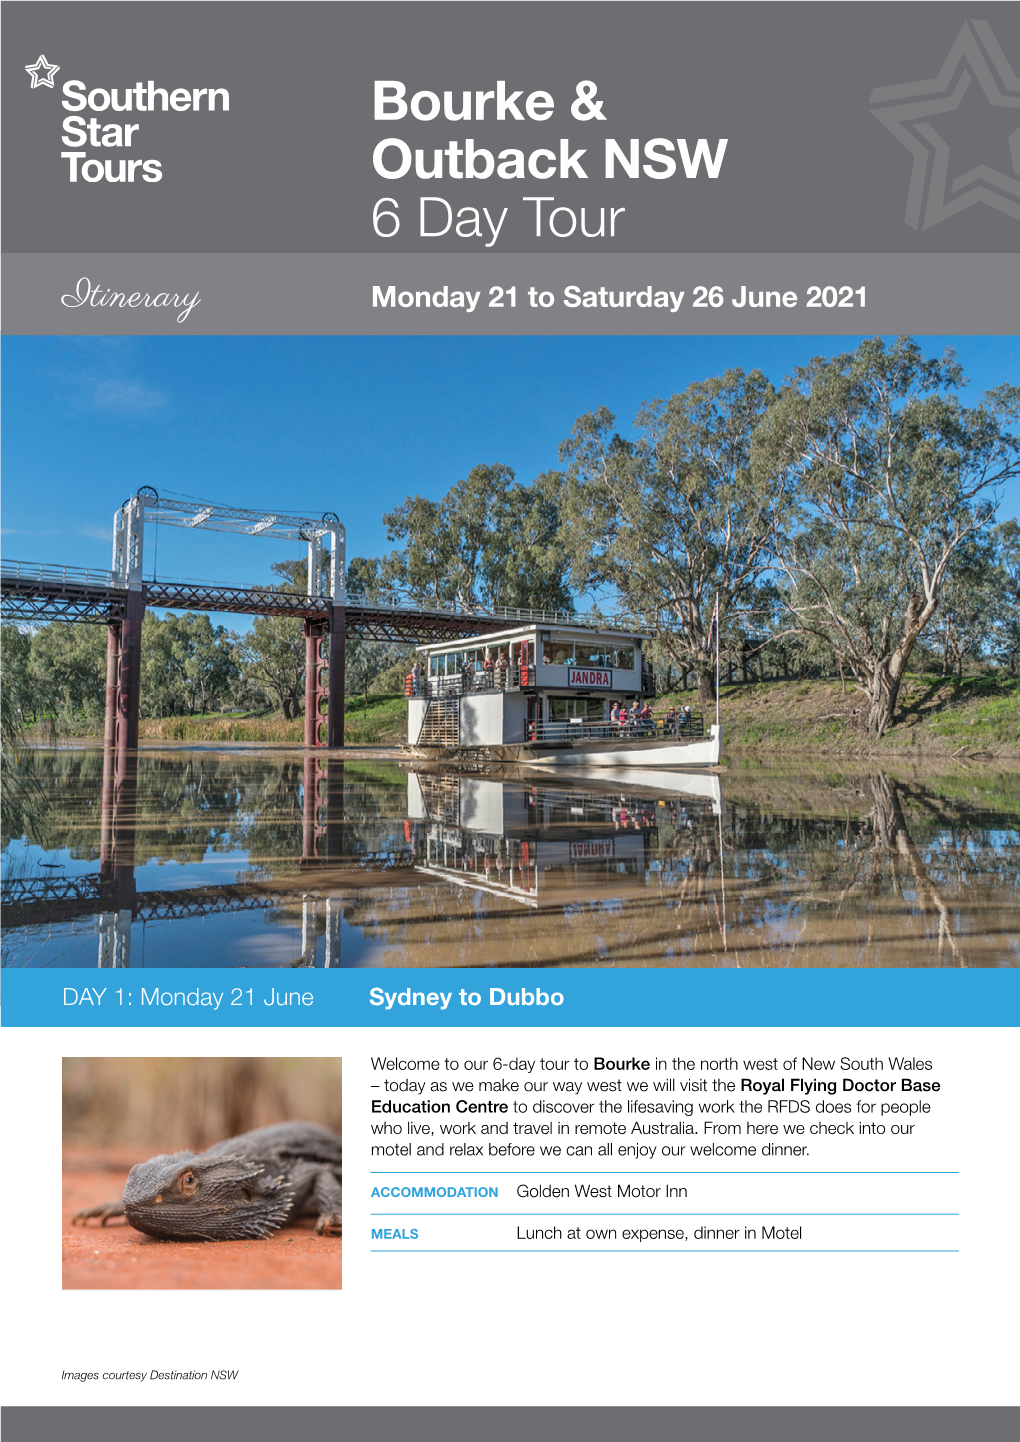 Bourke & Outback NSW 6 Day Tour